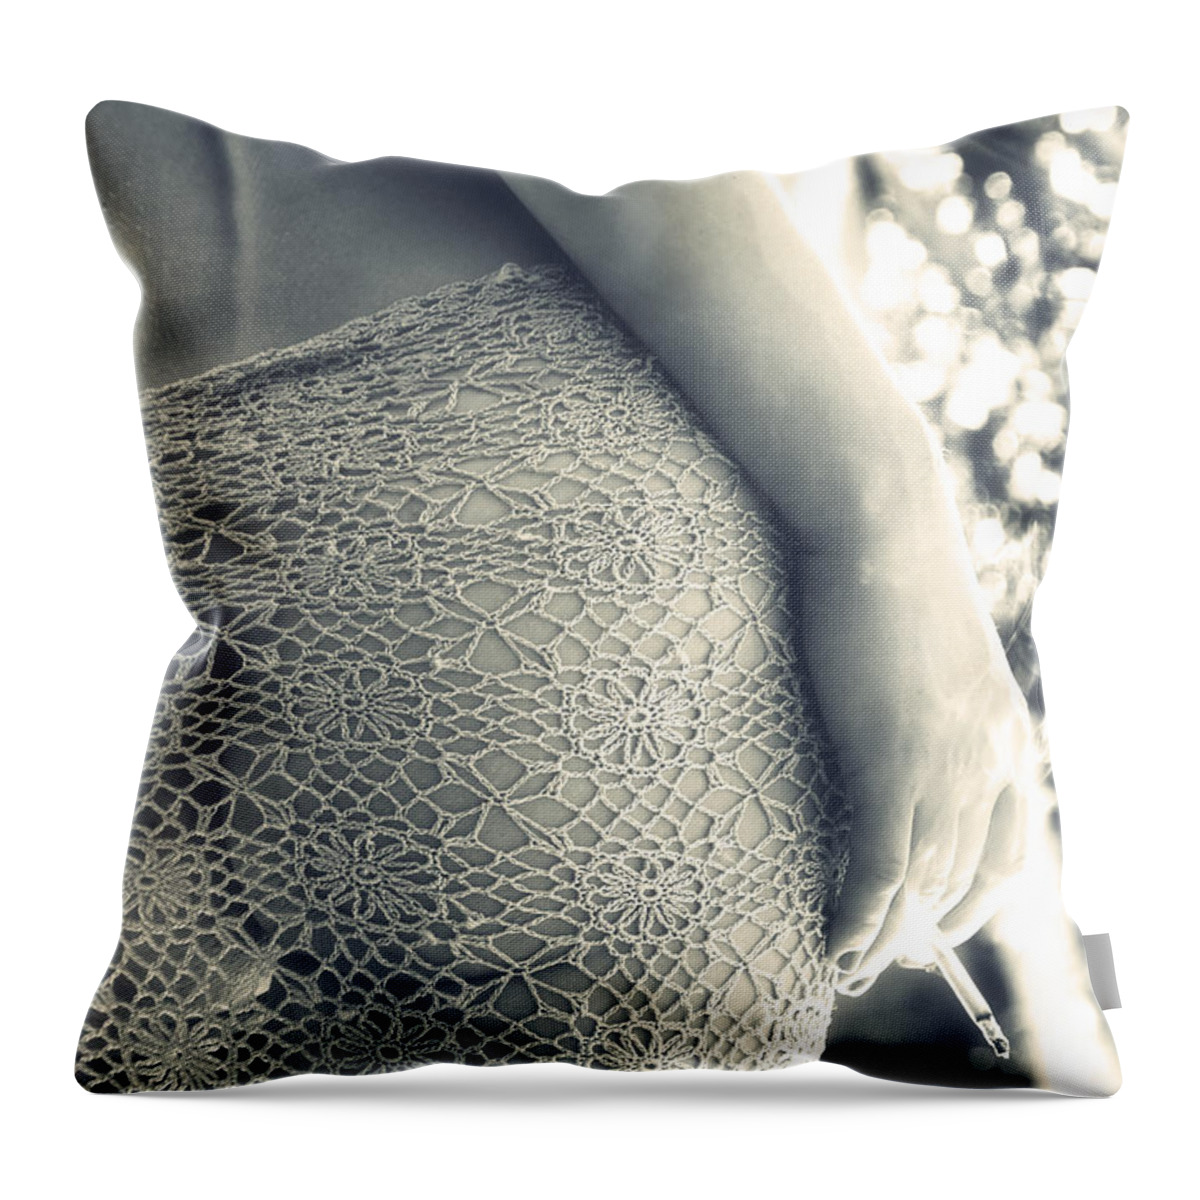 Art Throw Pillow featuring the photograph Woman by Stelios Kleanthous